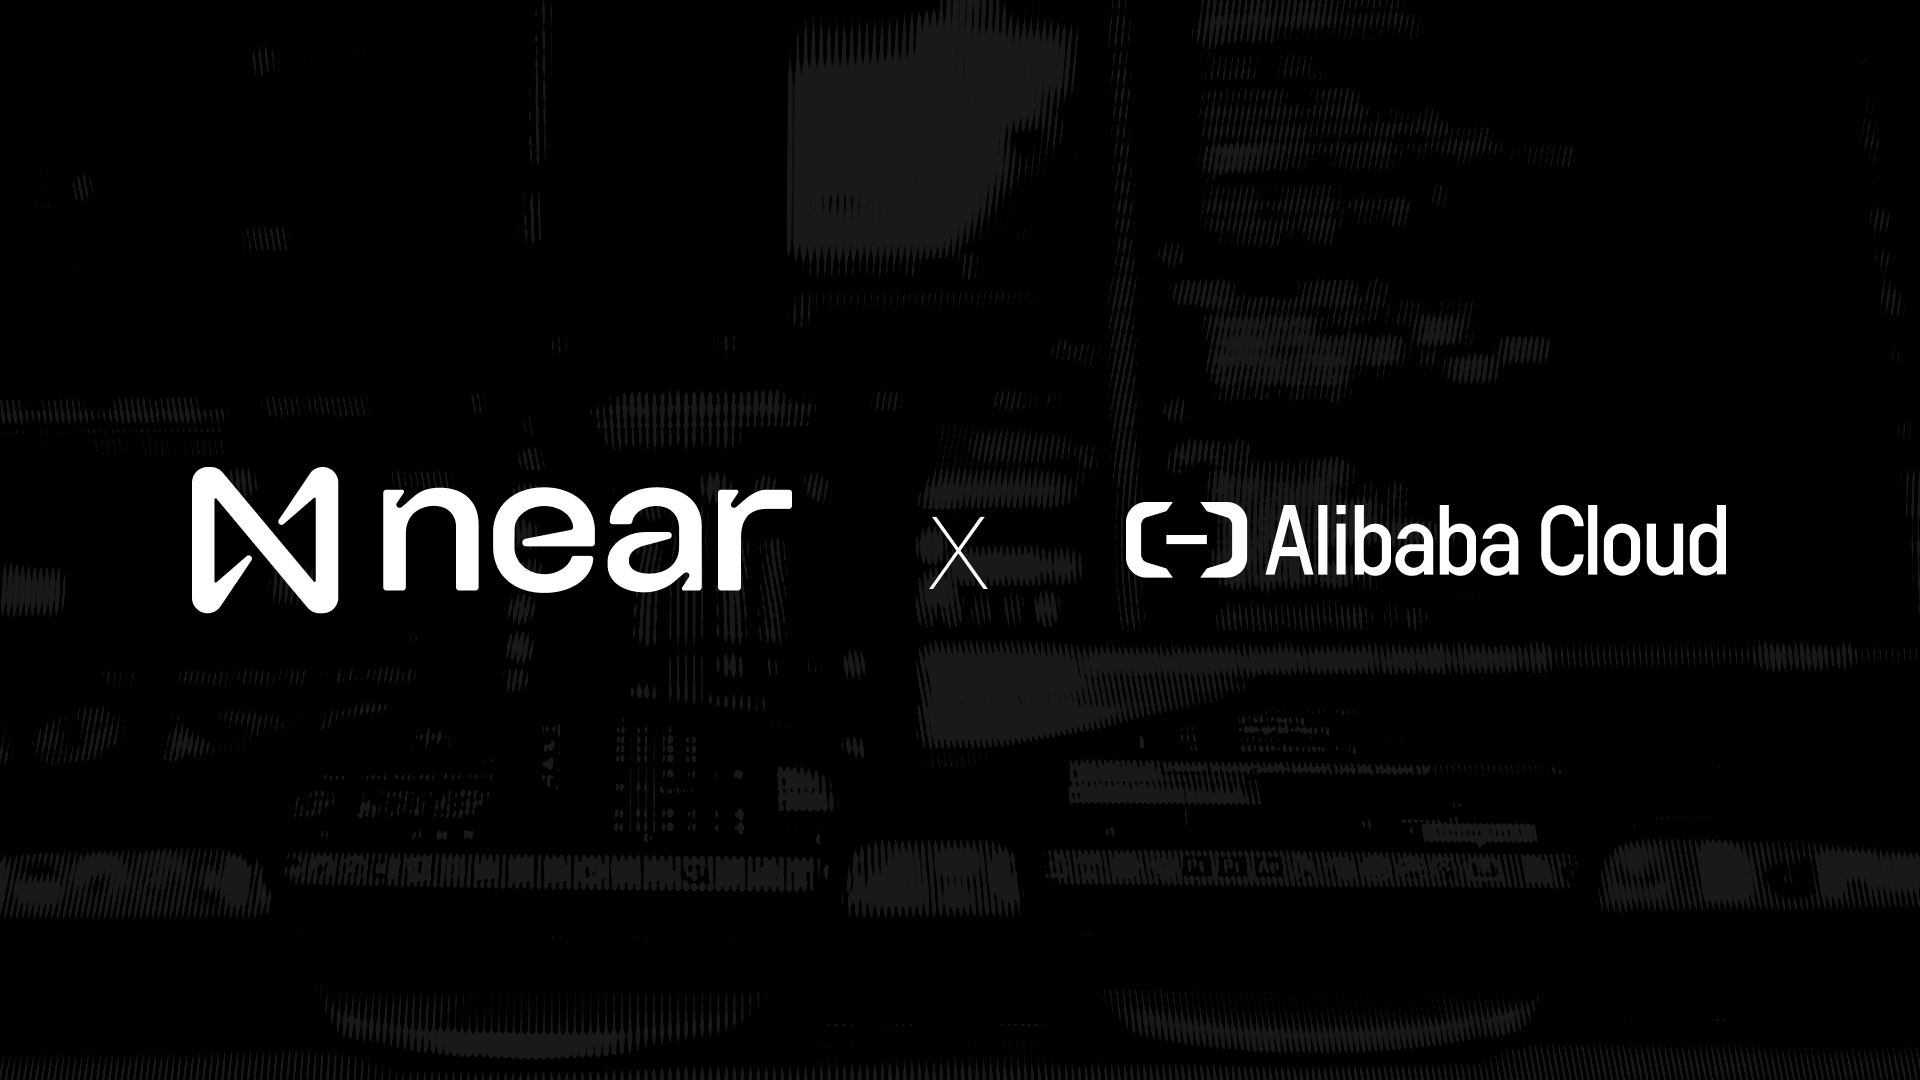 NEAR Foundation Partners With Alibaba Cloud For Web3 Services